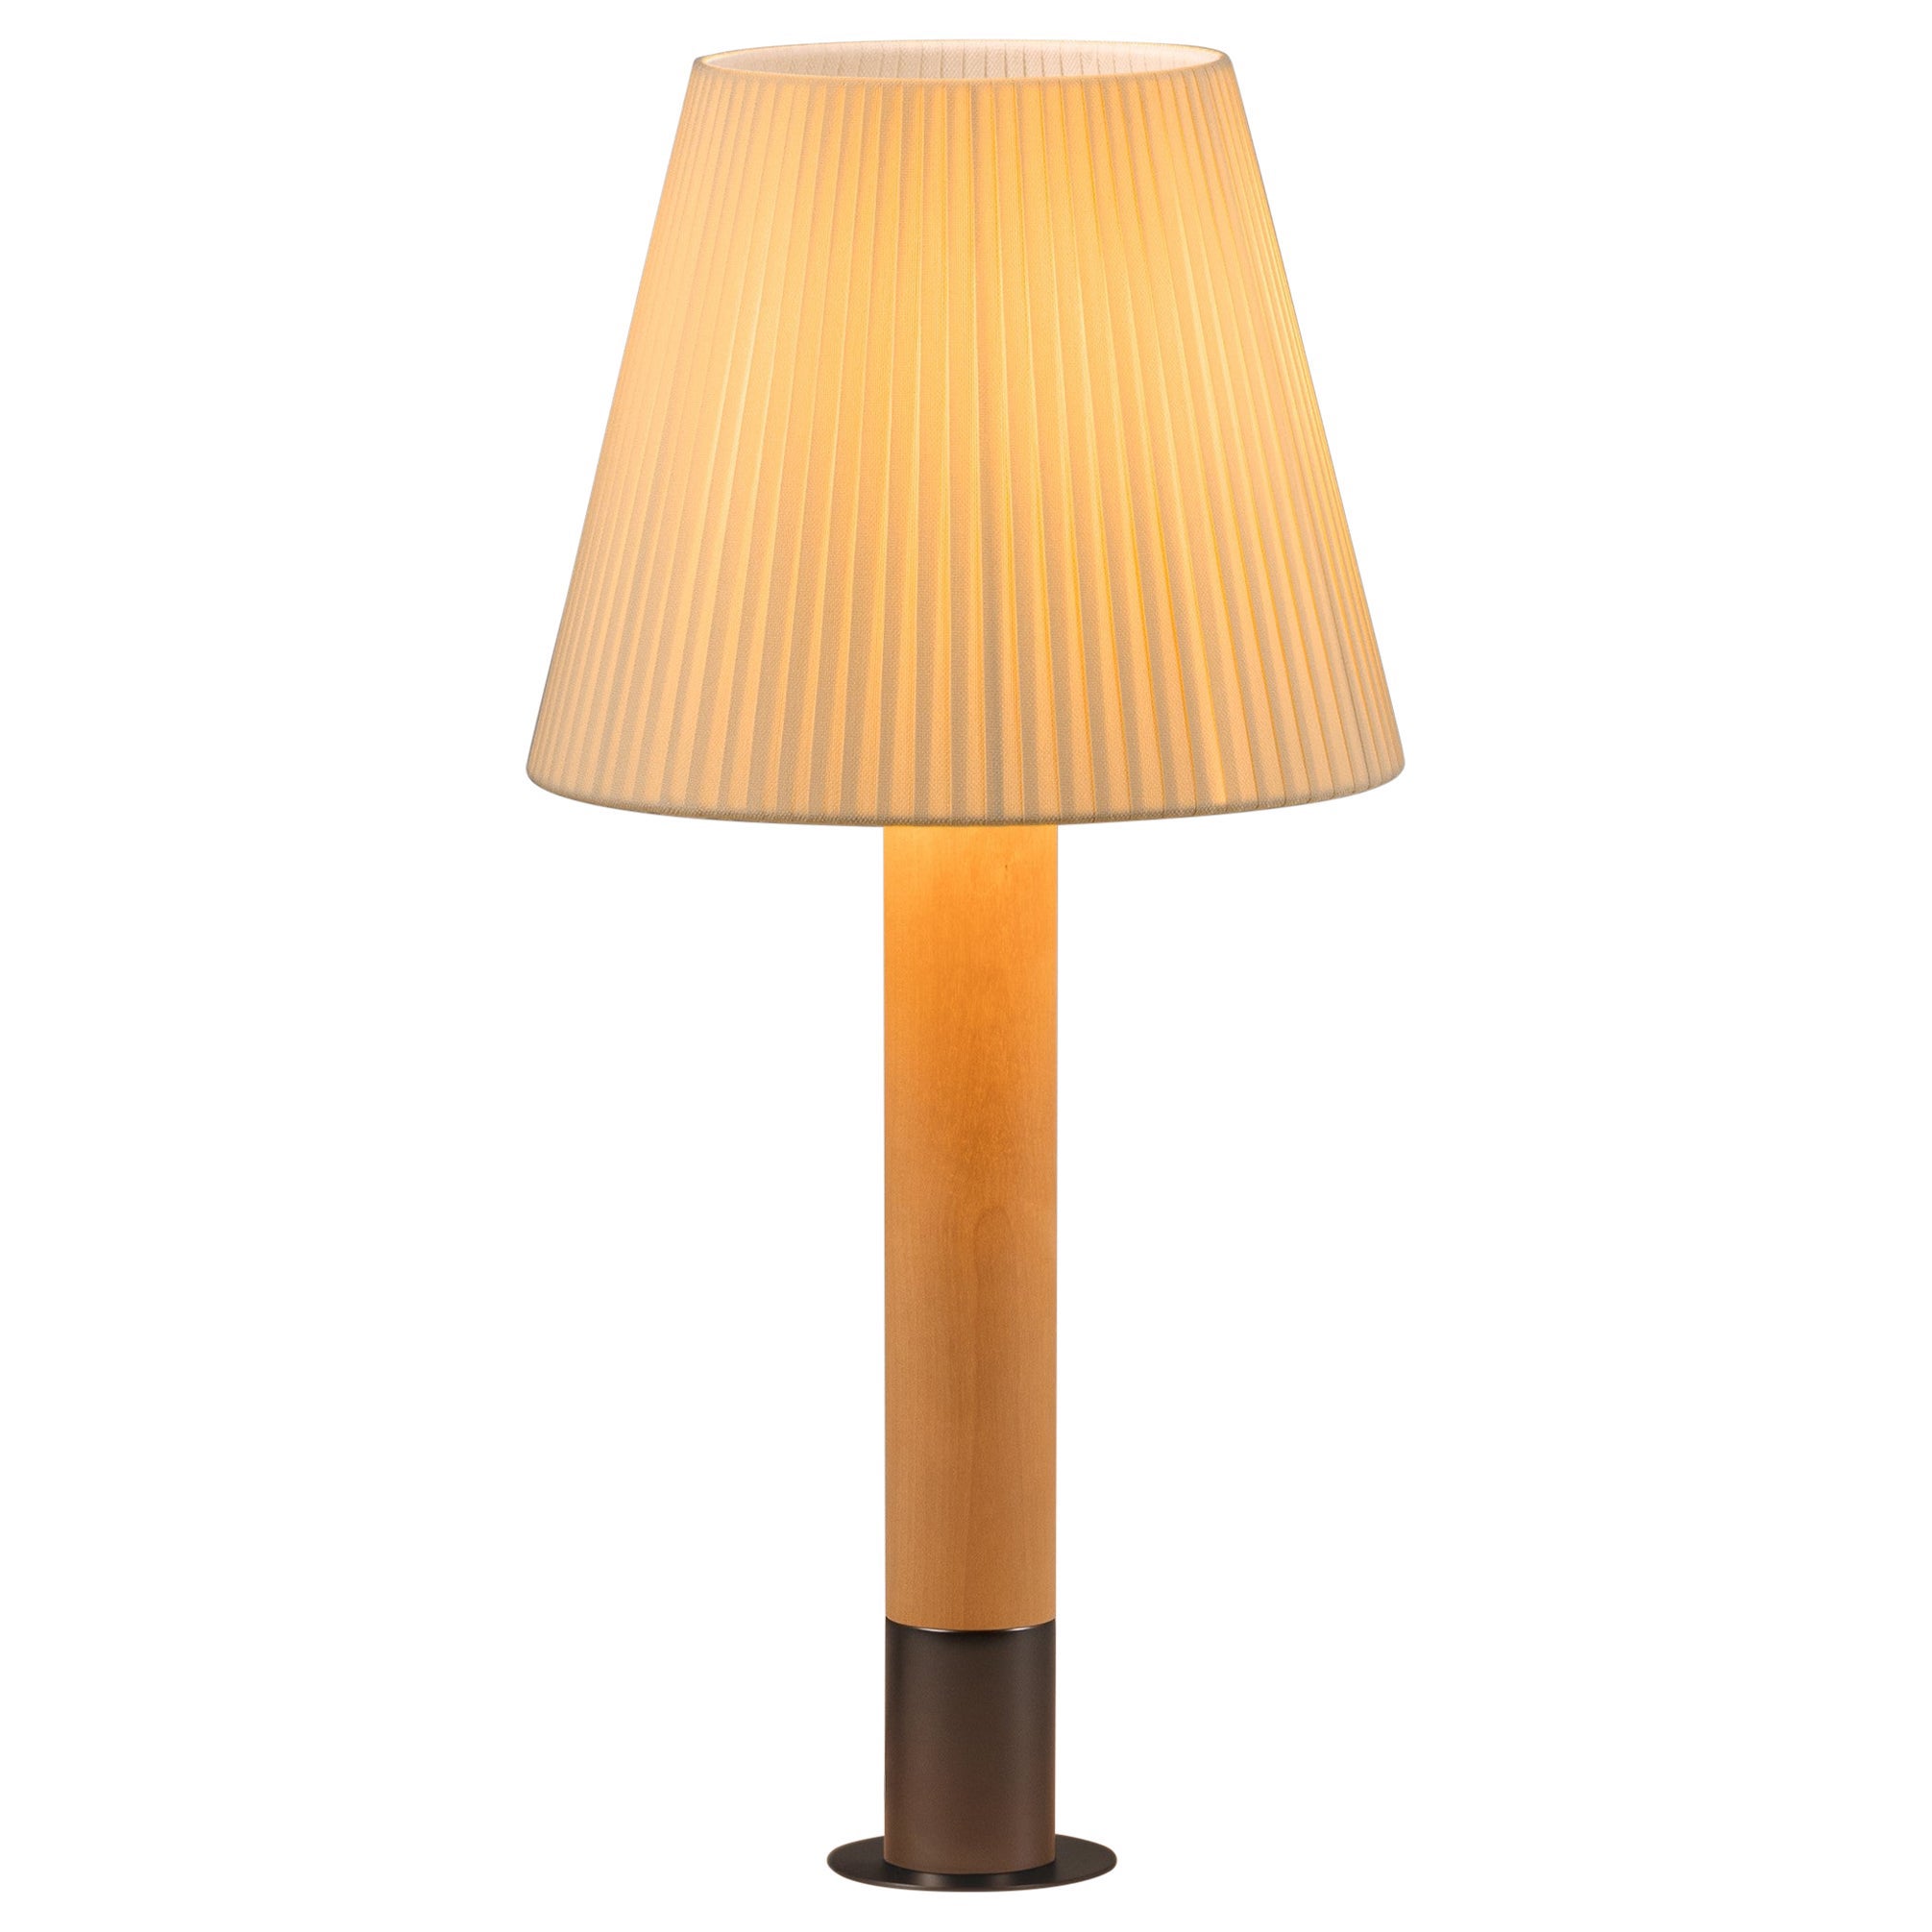 Bronze and Natural Básica M1 Table Lamp by Santiago Roqueta, Santa & Cole For Sale